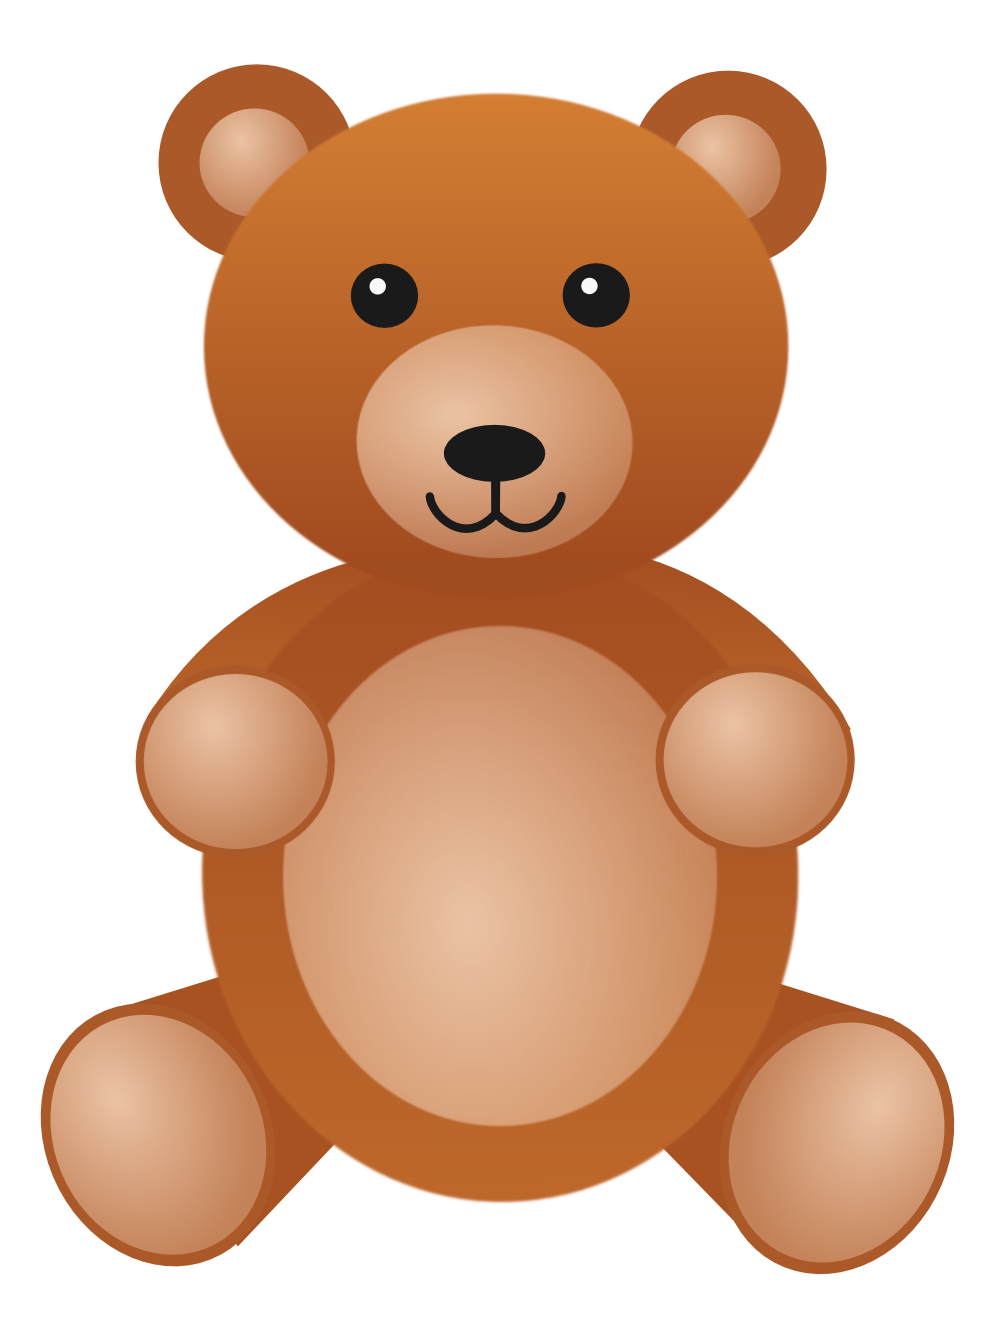 Free Teddy Bear Clipart Transparent, Download Free Clip Art